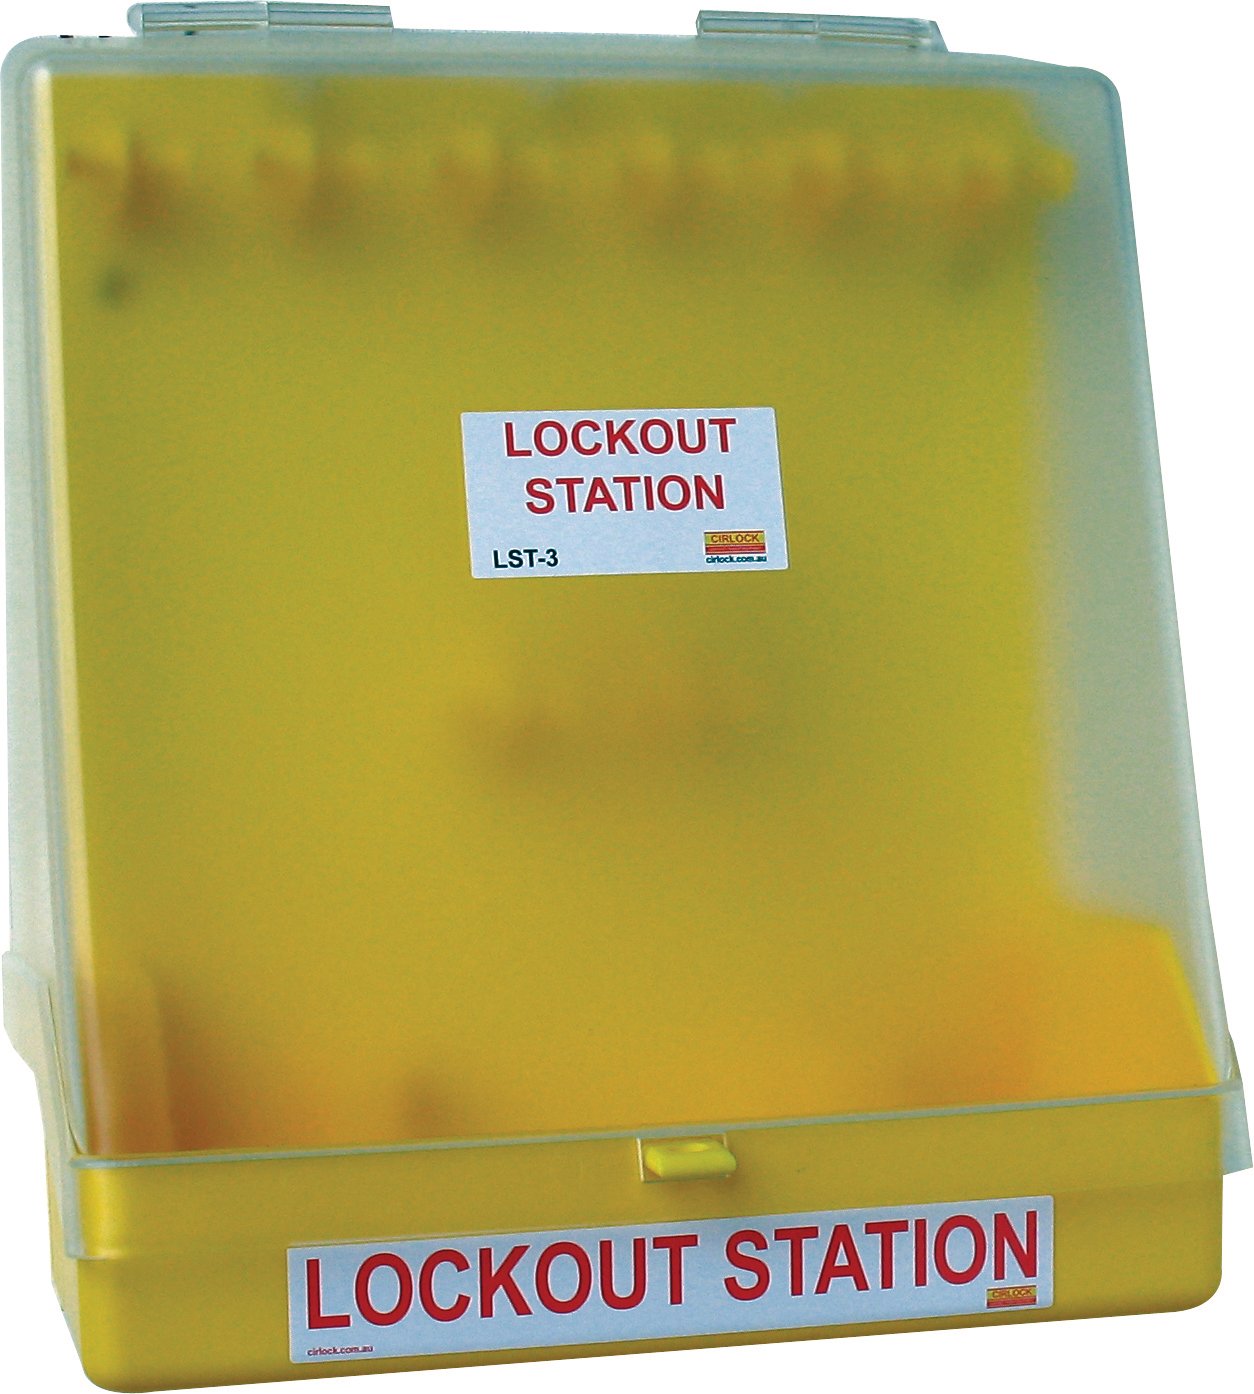 Lockout Stations With Lids